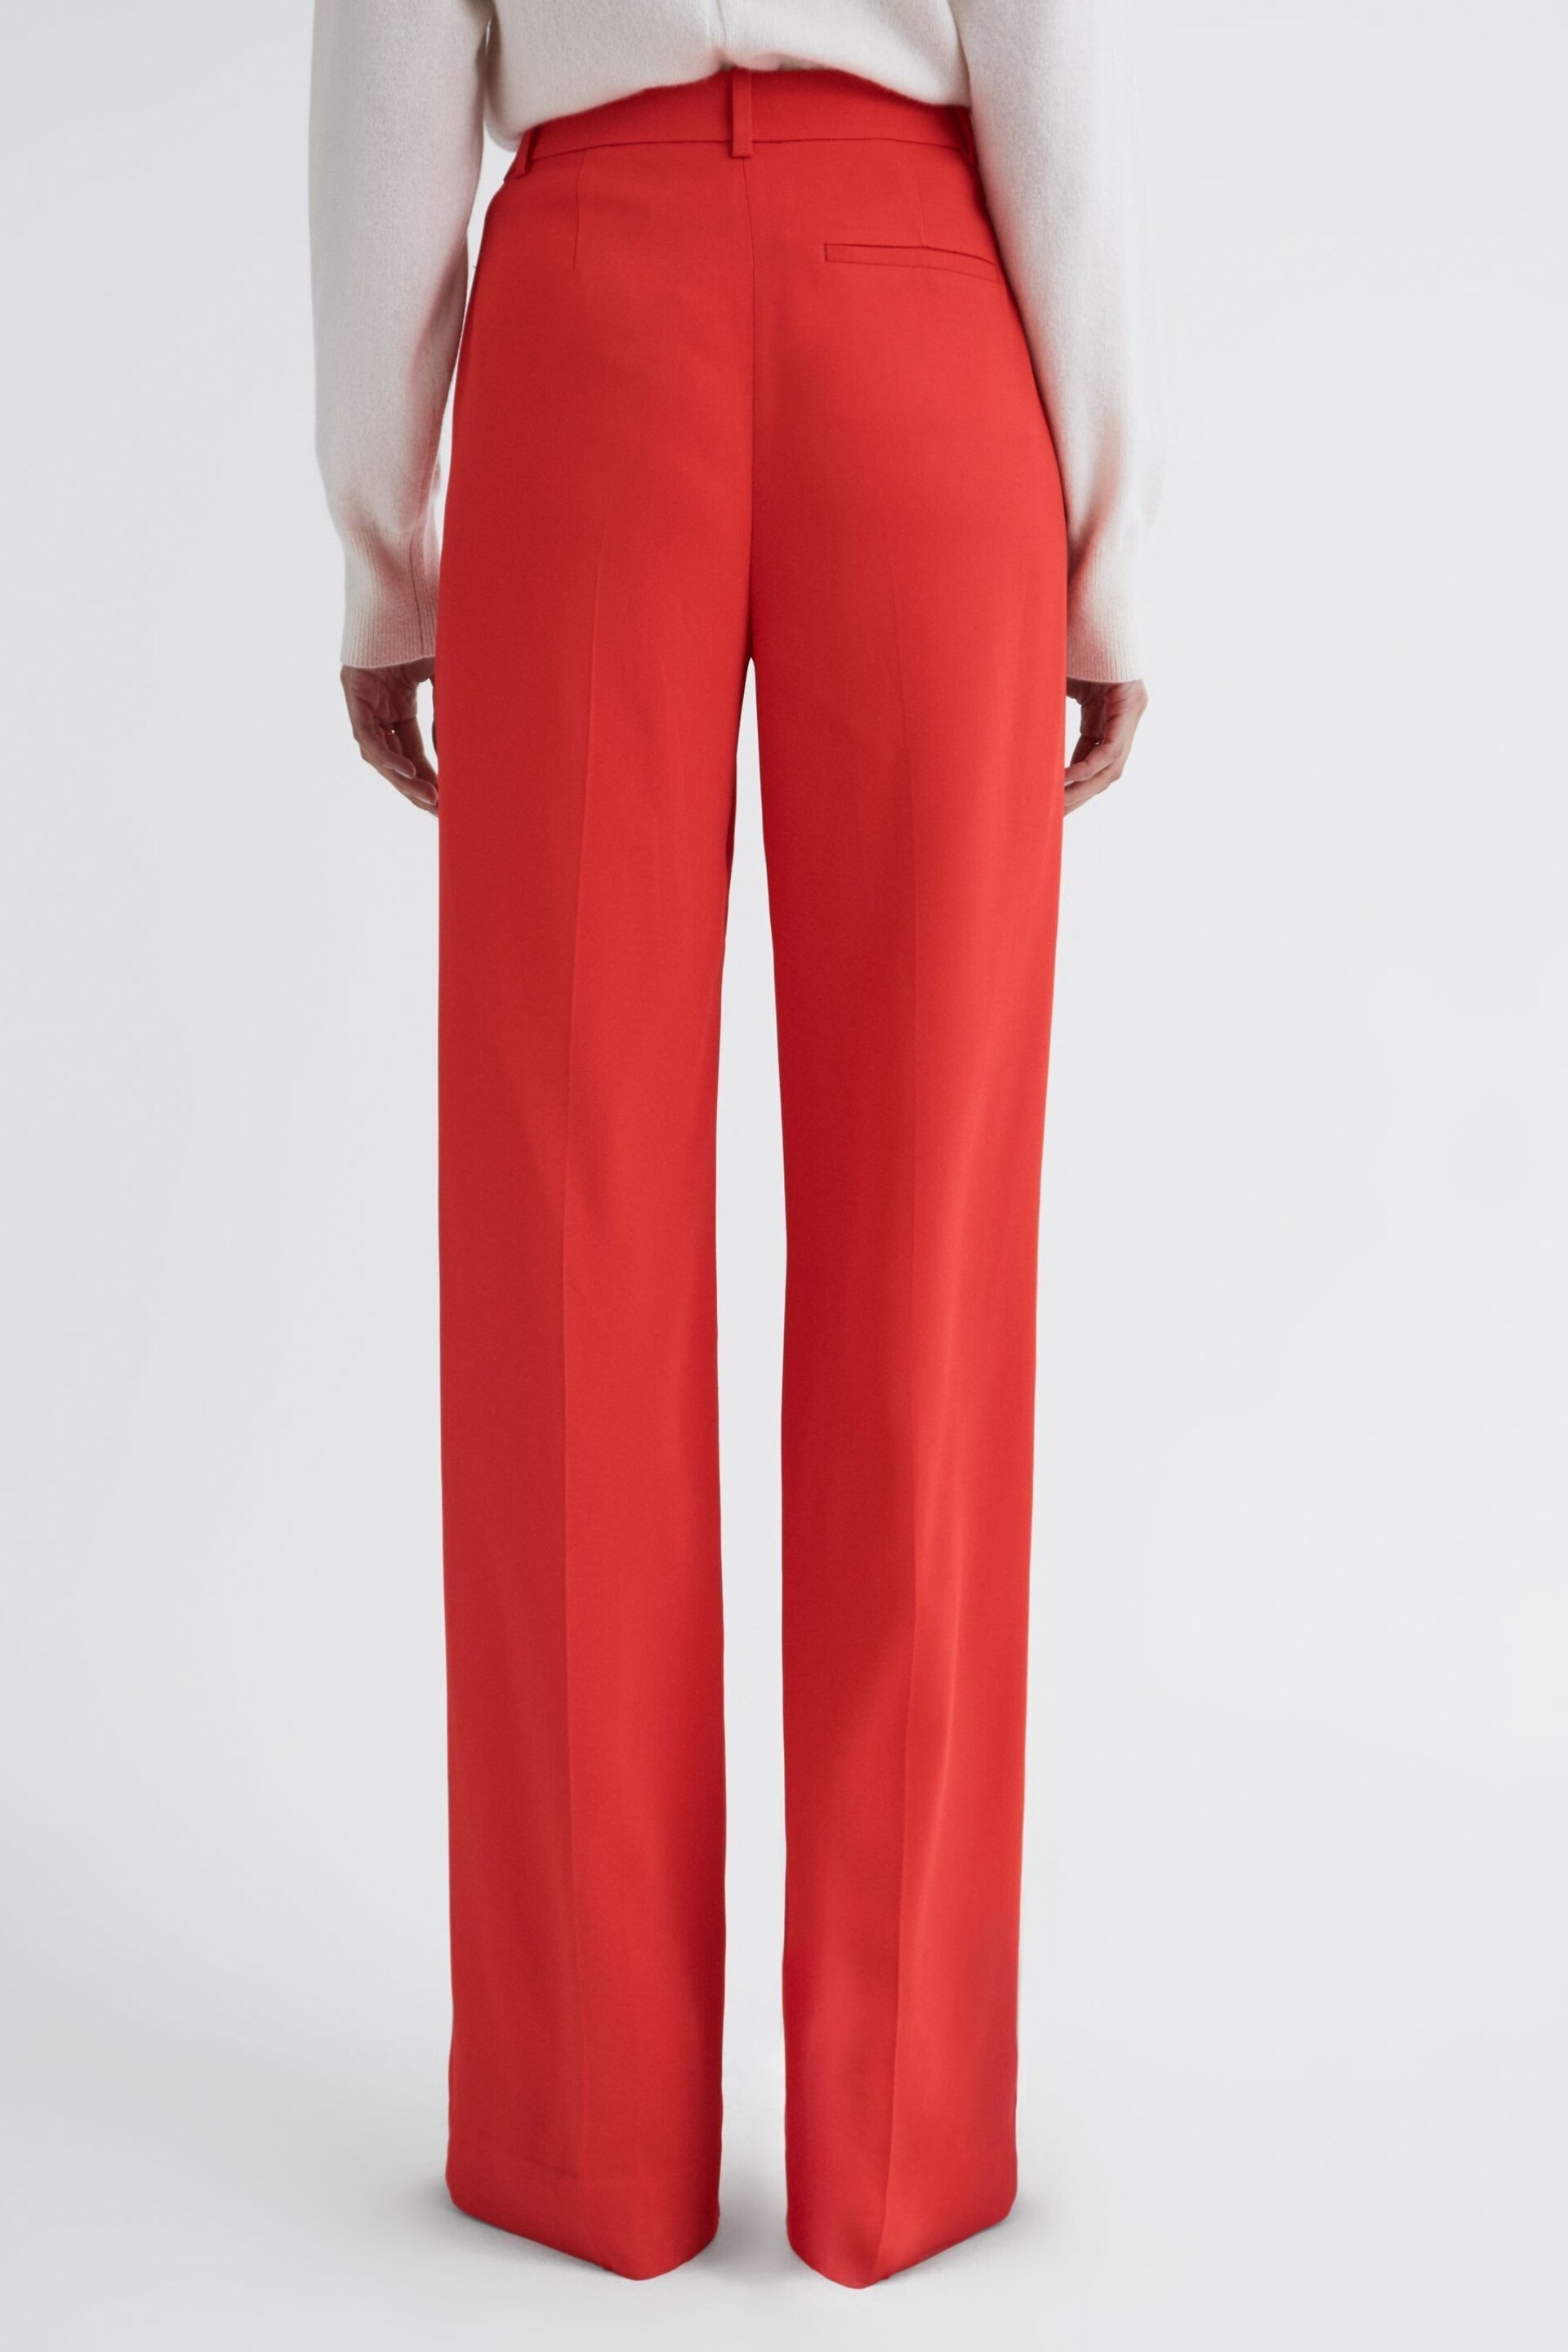 Reiss Coral Cara Wide Leg Mid Rise Trousers - Image 5 of 5